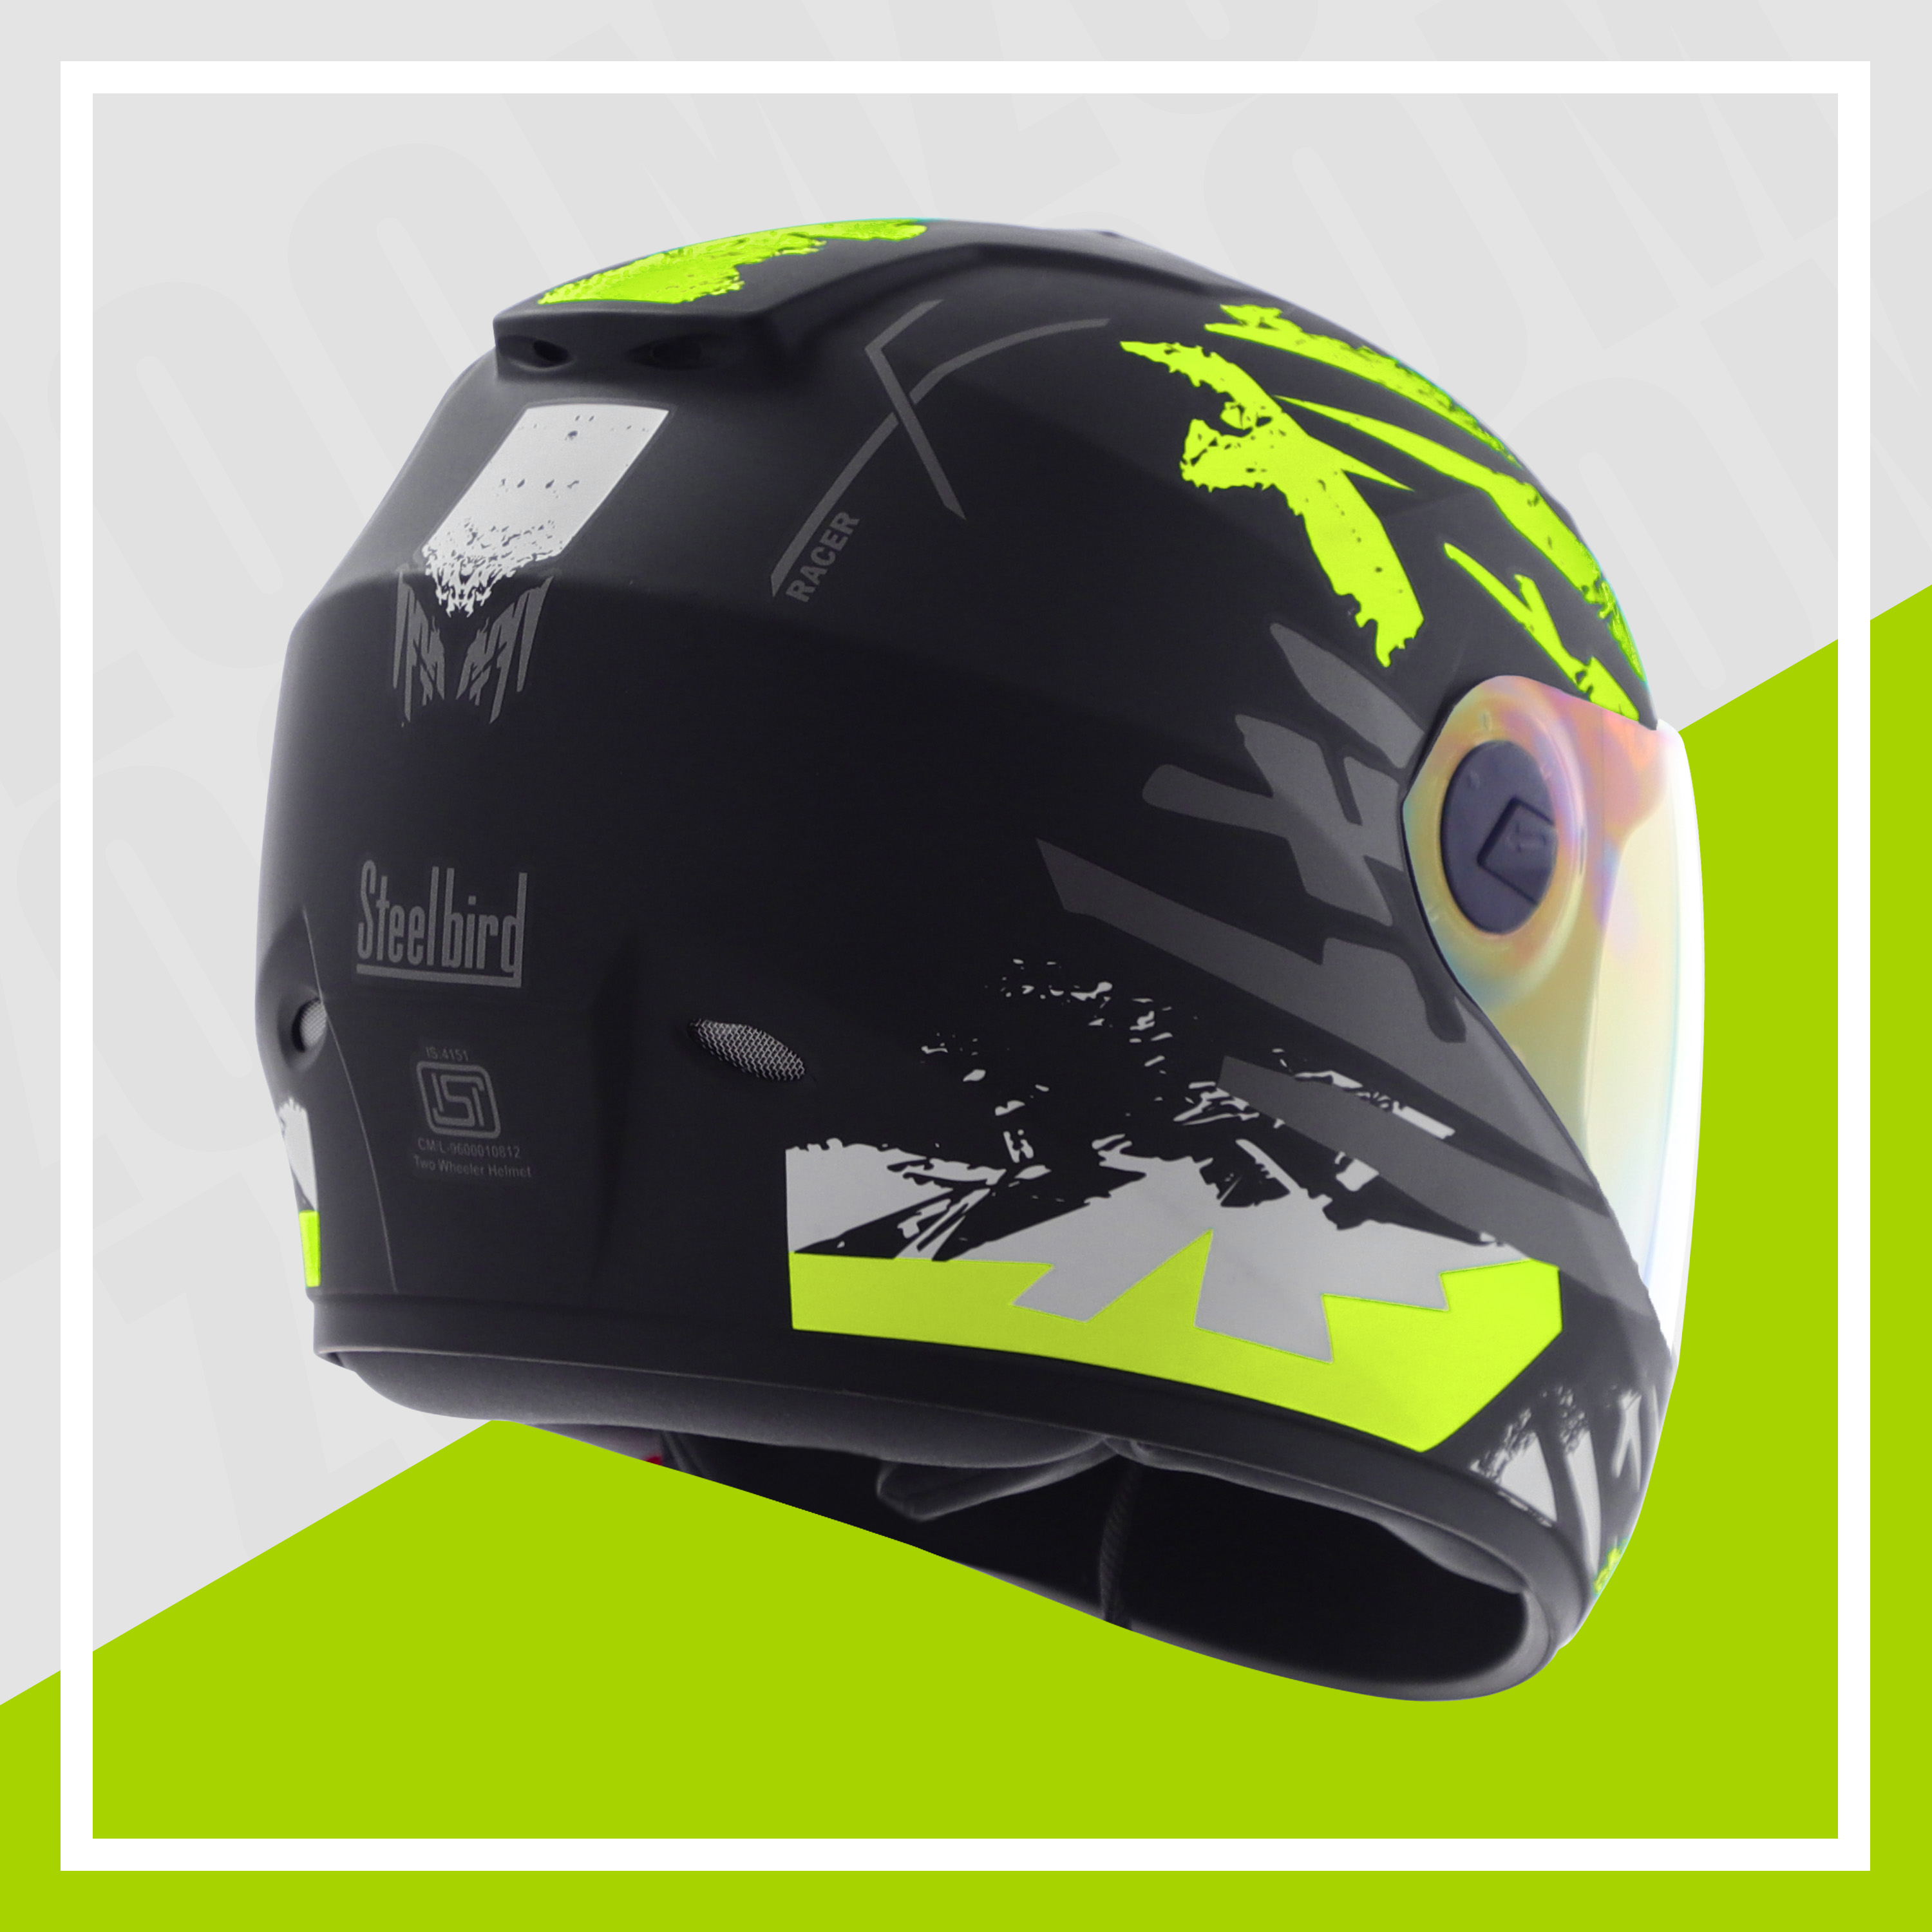 Steelbird SBH-11 Zoom Racer ISI Certified Full Face Graphic Helmet For Men And Women (Glossy Black Neon With Chrome Rainbow Visor)